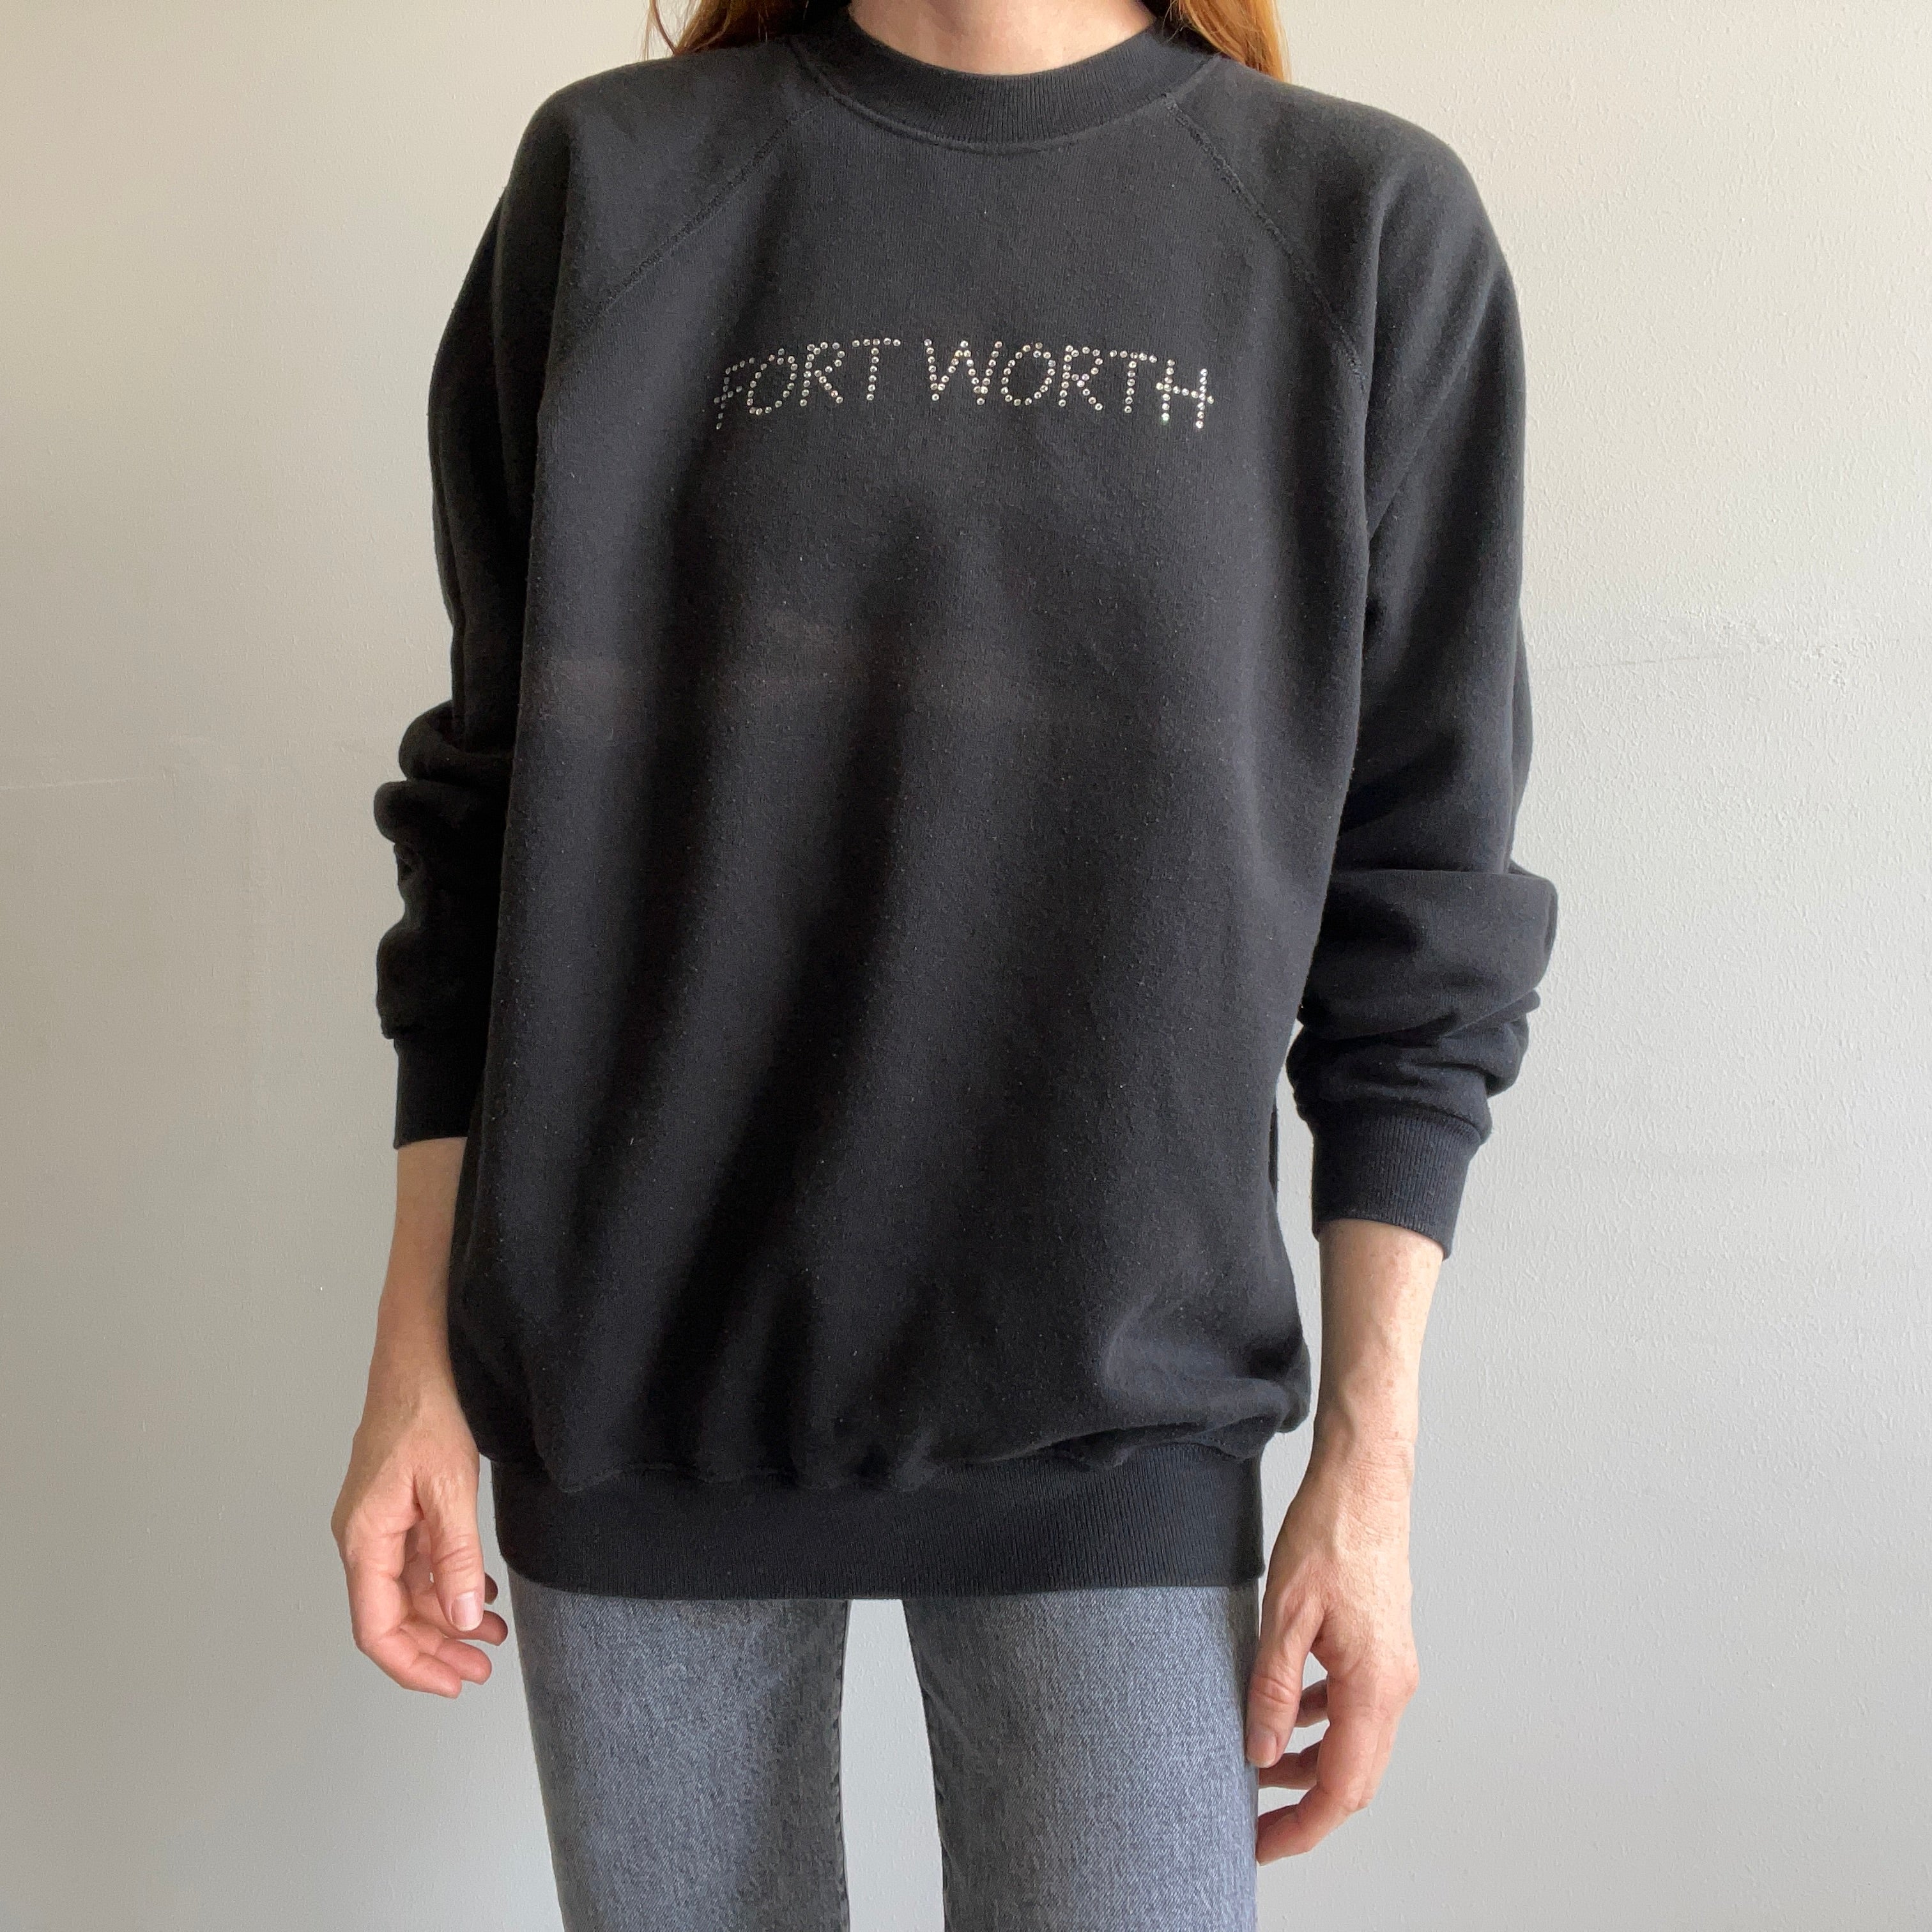 1980s Sparkle-mania Fort Worth Texas Sweatshirt with a Fade Fold - Cozy!